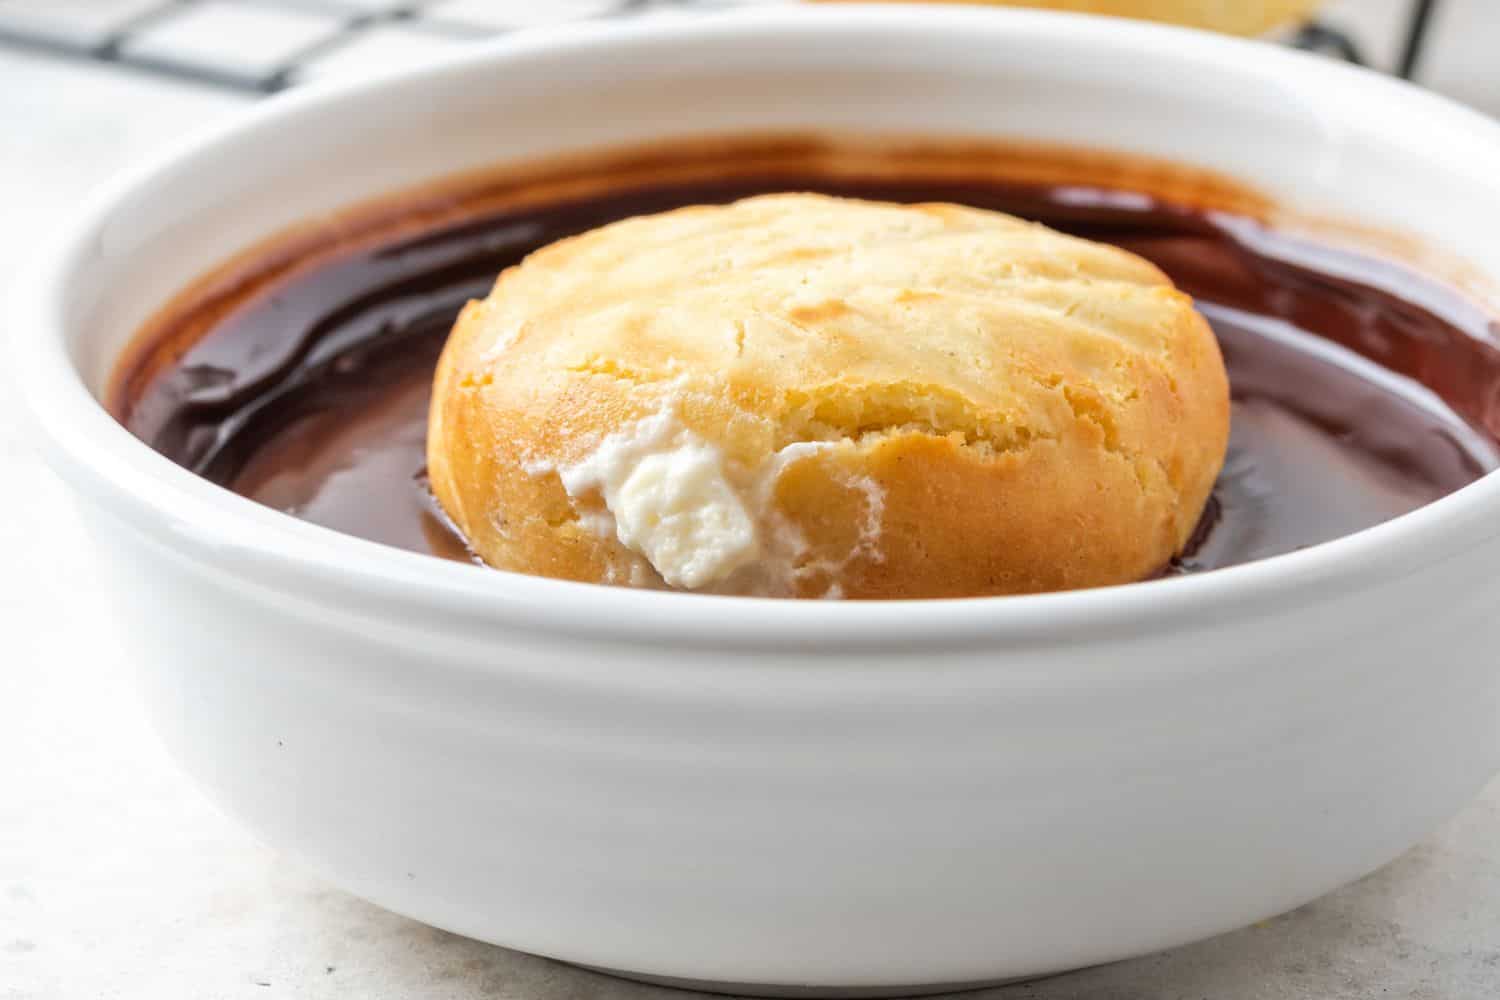 A round filled donut floating upside down in a bowl of chocolate glaze.